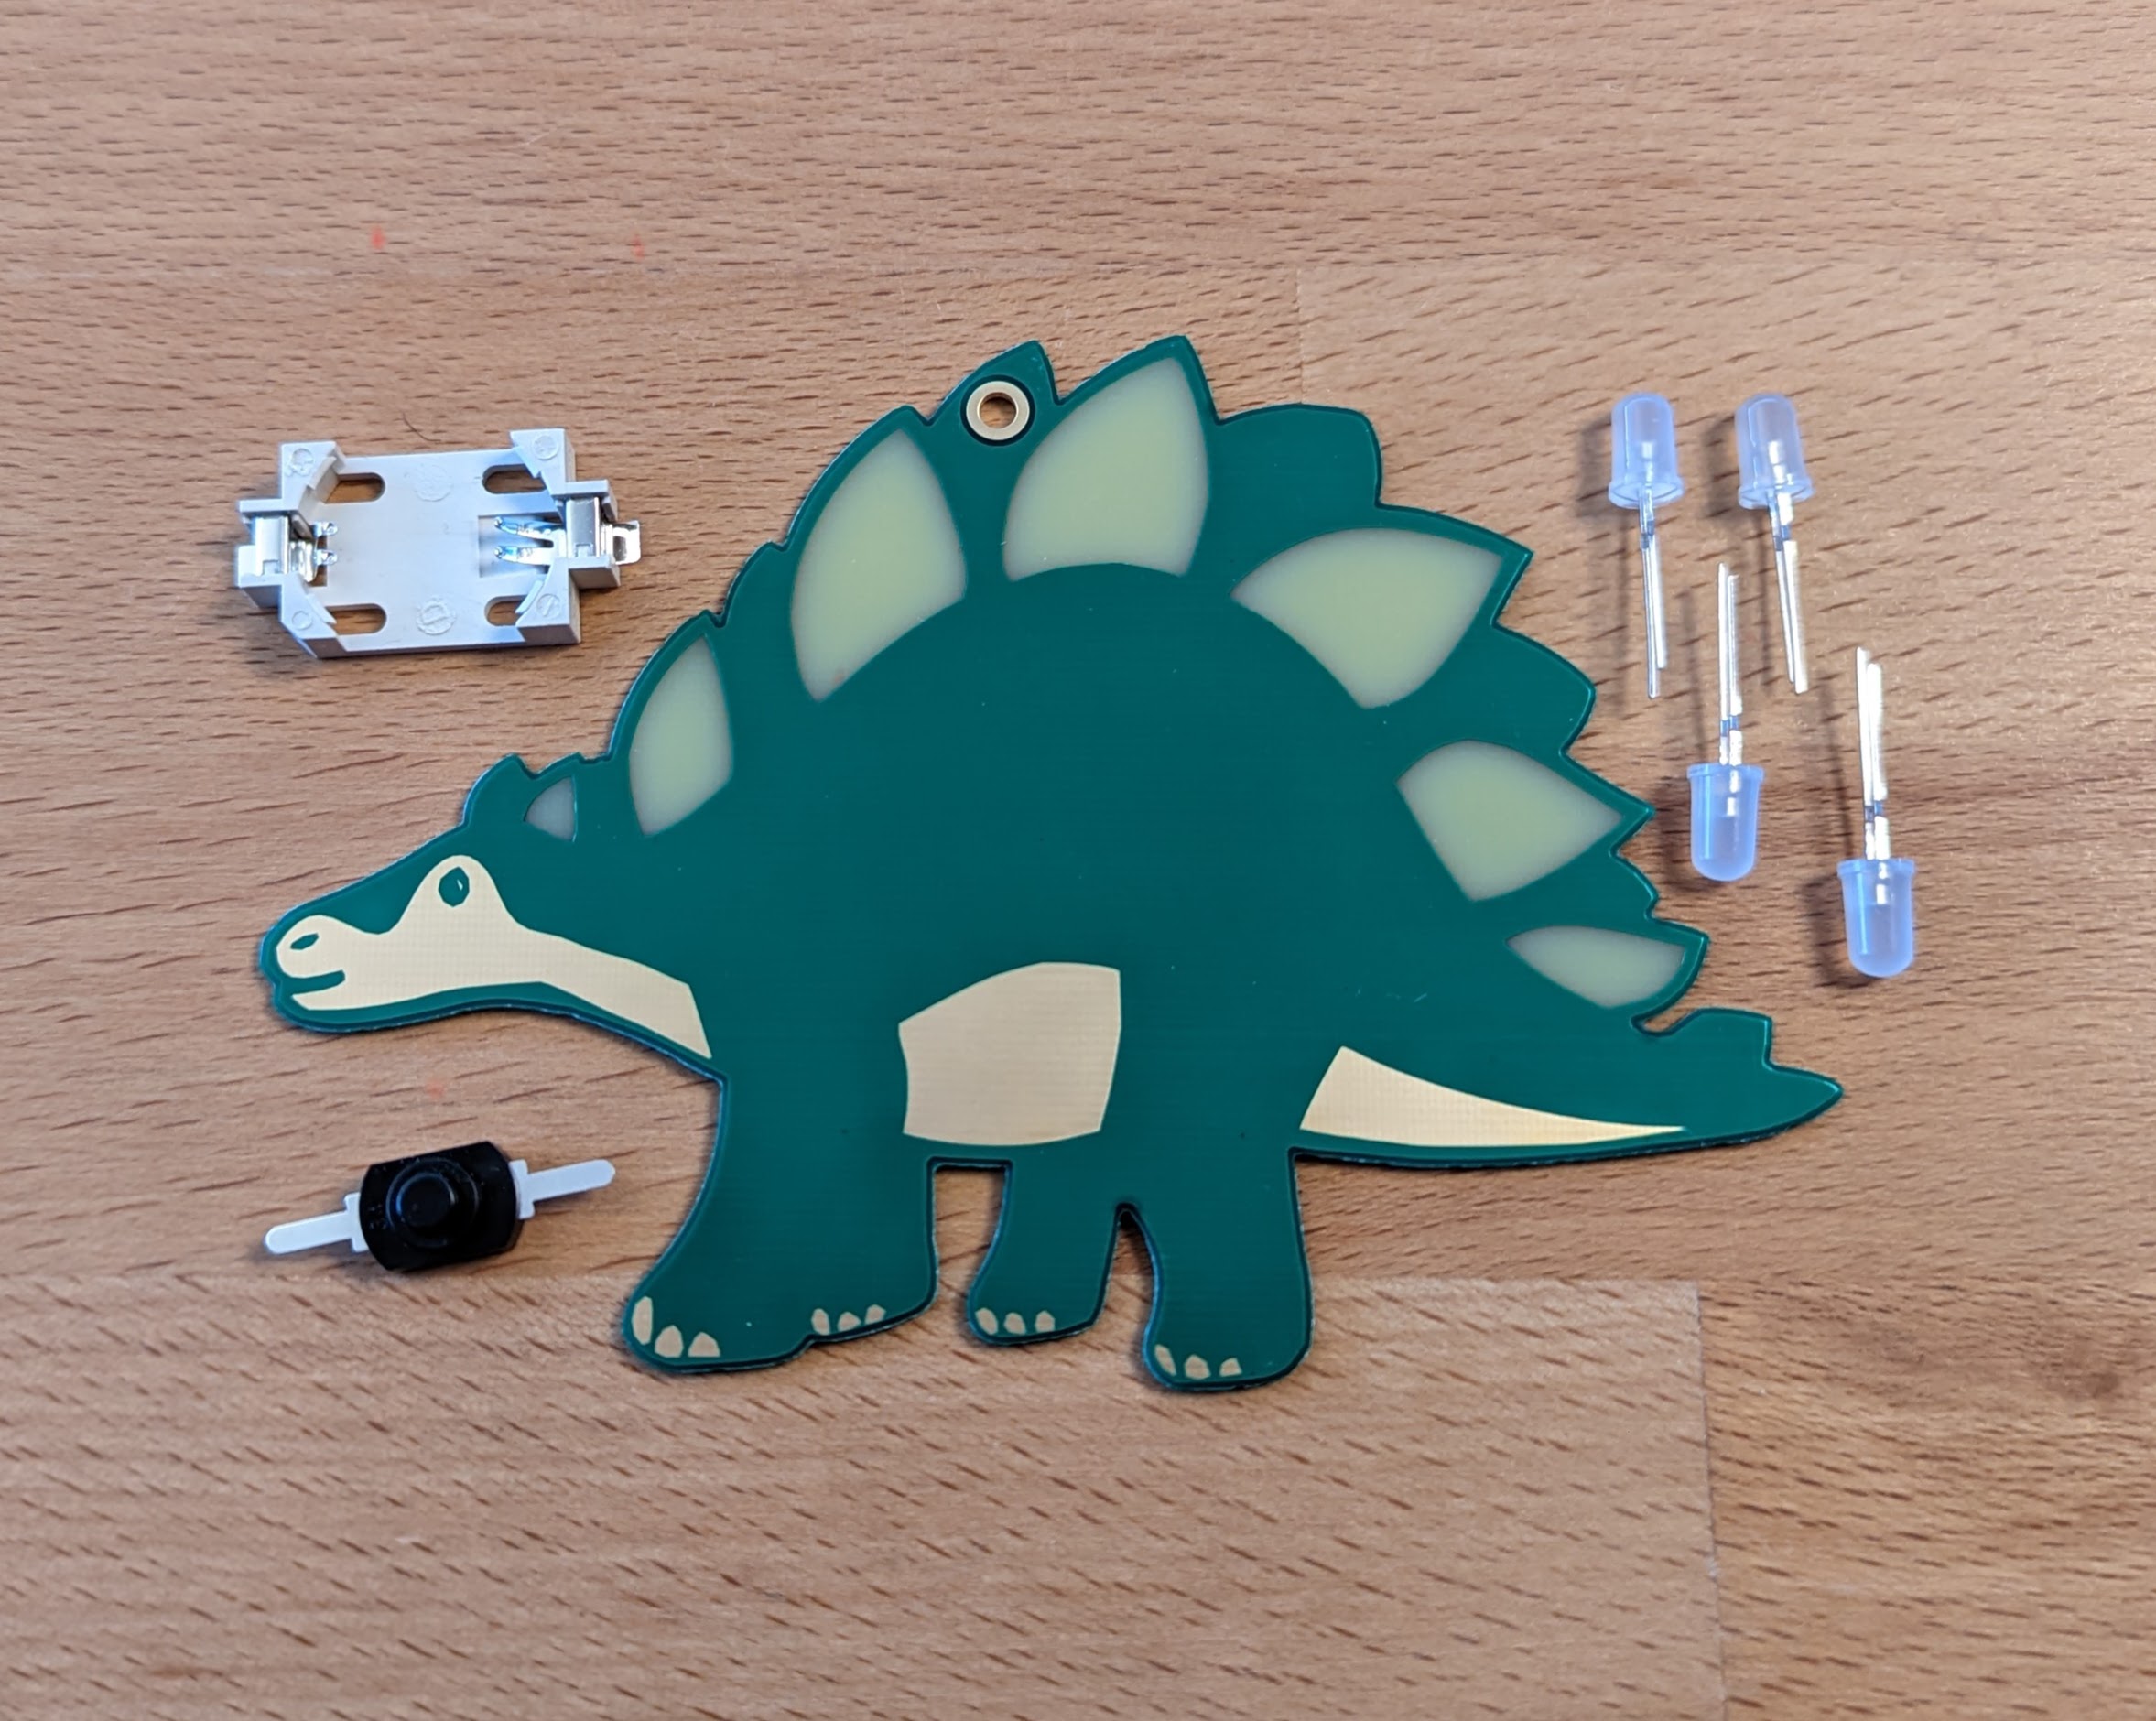 Dino - From a time long gone, this soldering kit glows in all the colours of the rainbow